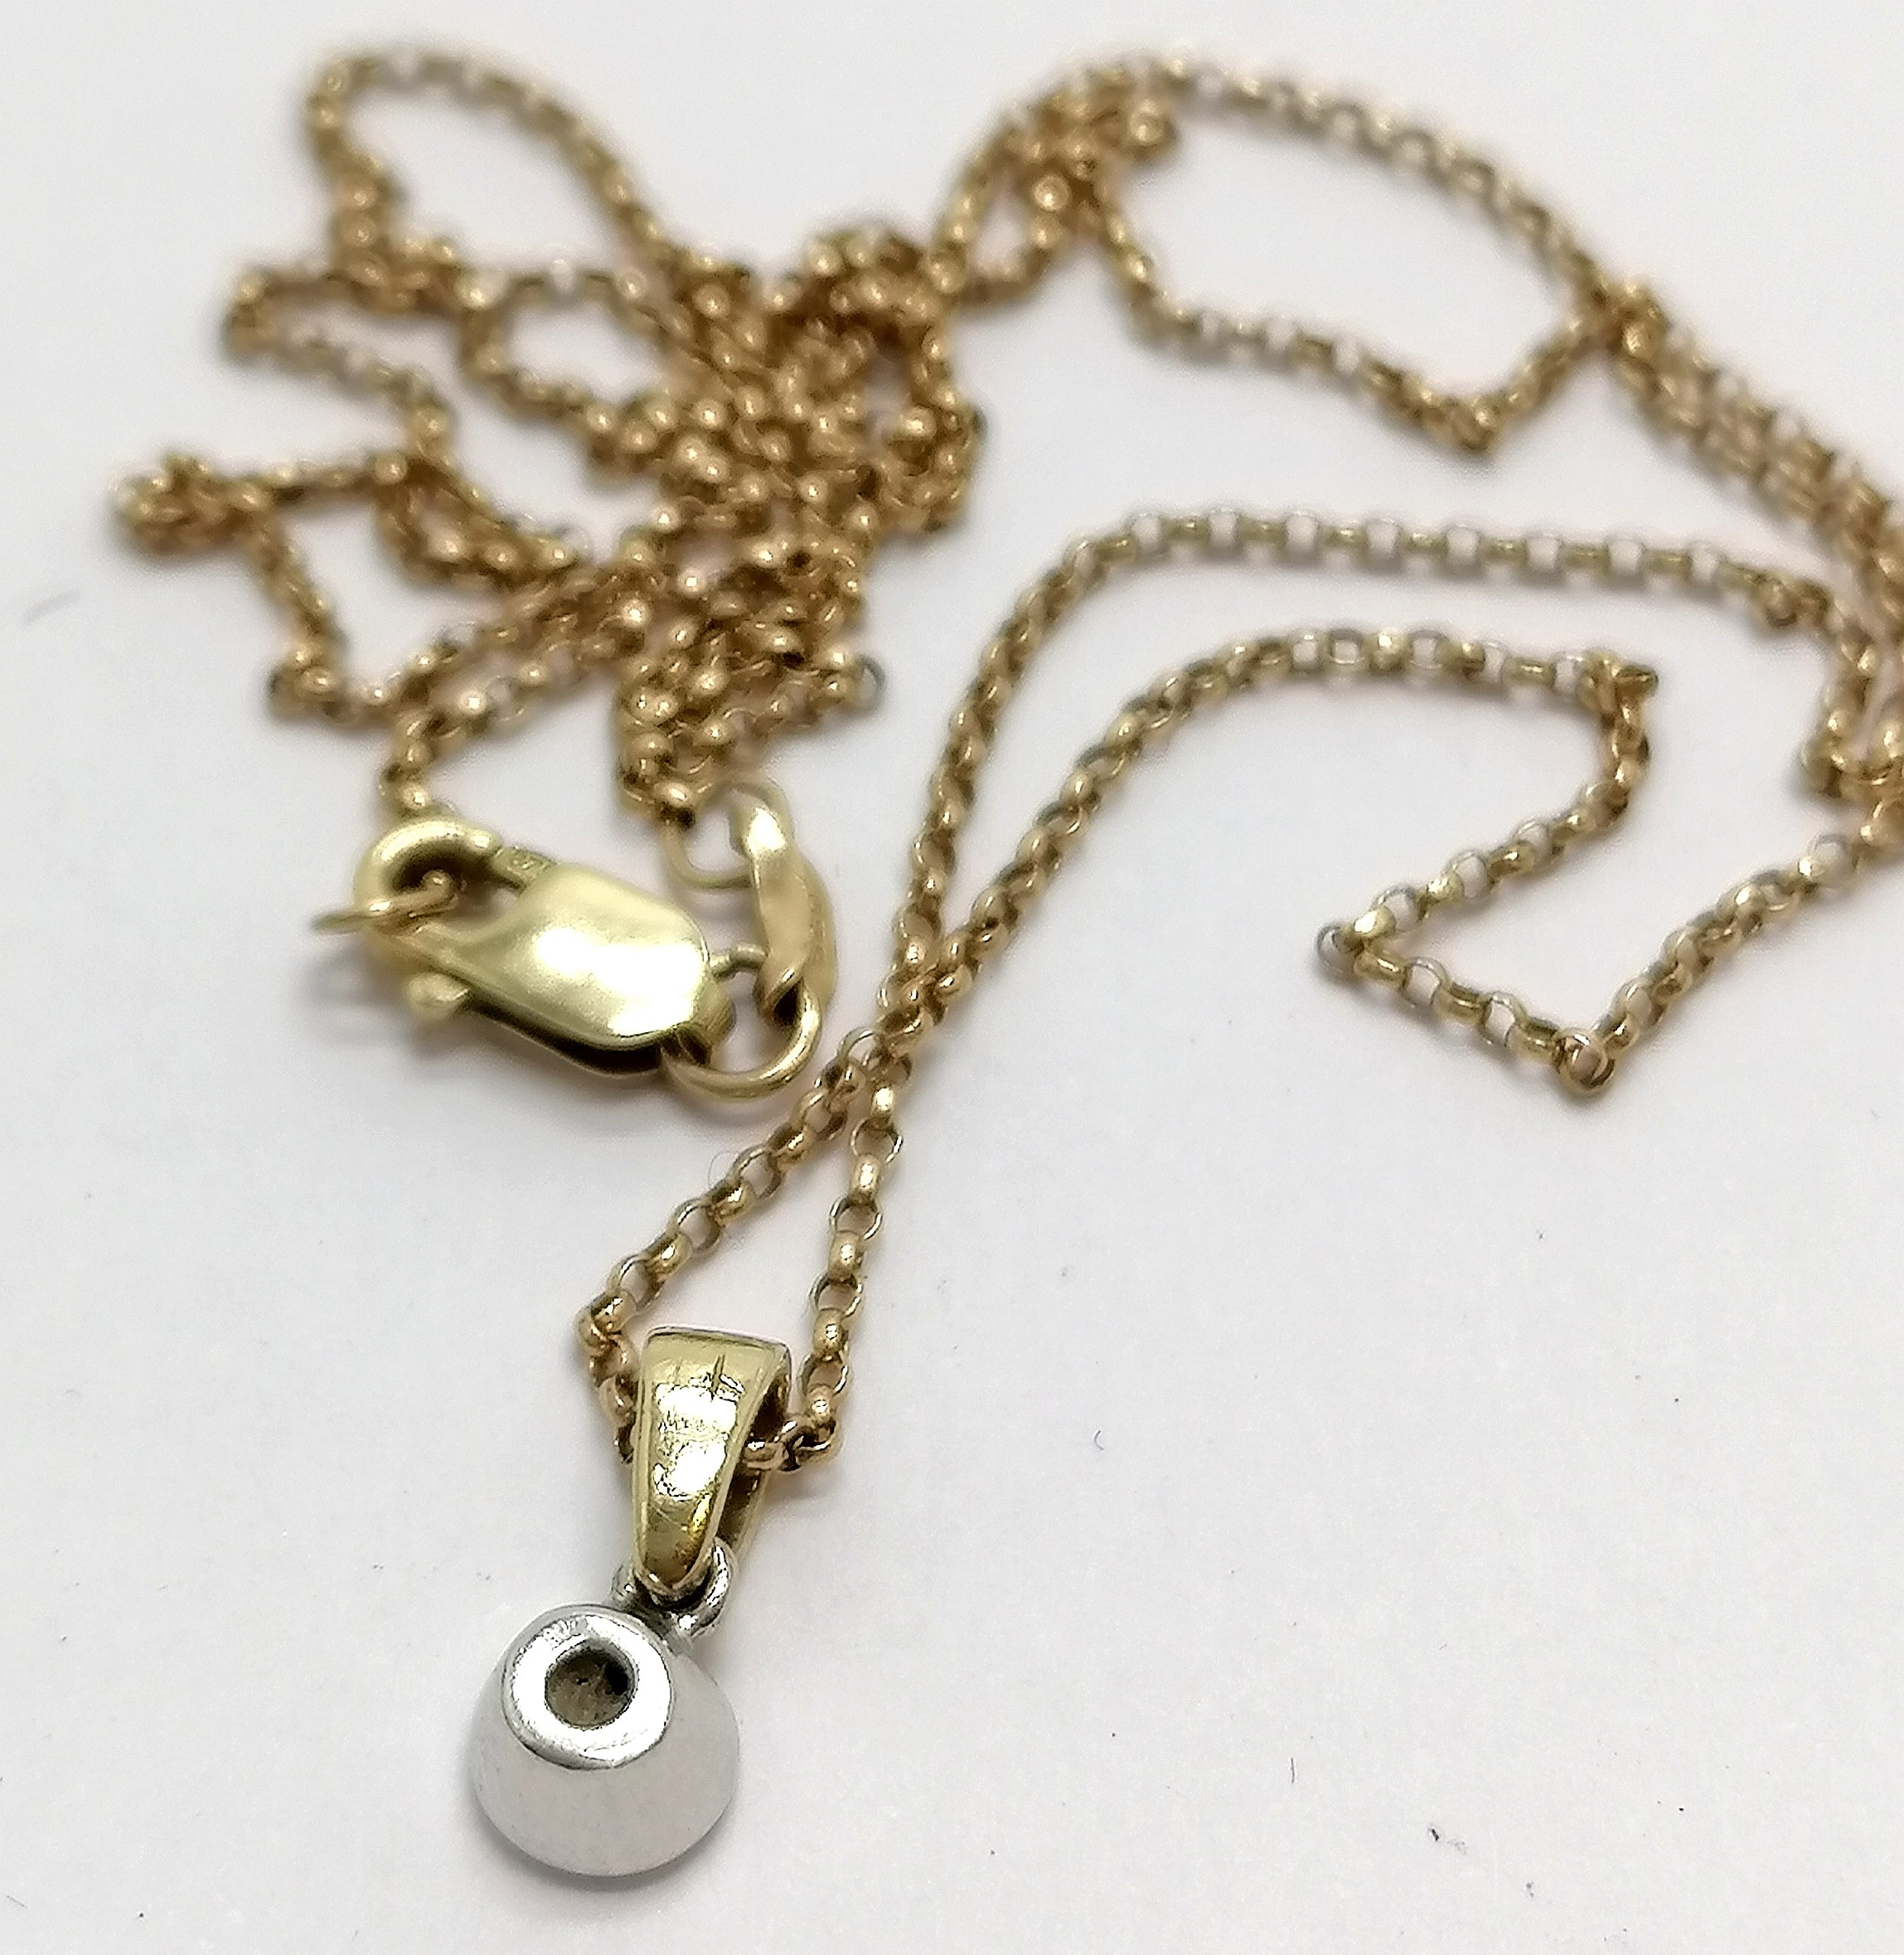 9ct hallmarked gold diamond pendant (4.5mm diameter) on a 9ct hallmarked gold 40cm chain - total - Image 2 of 3